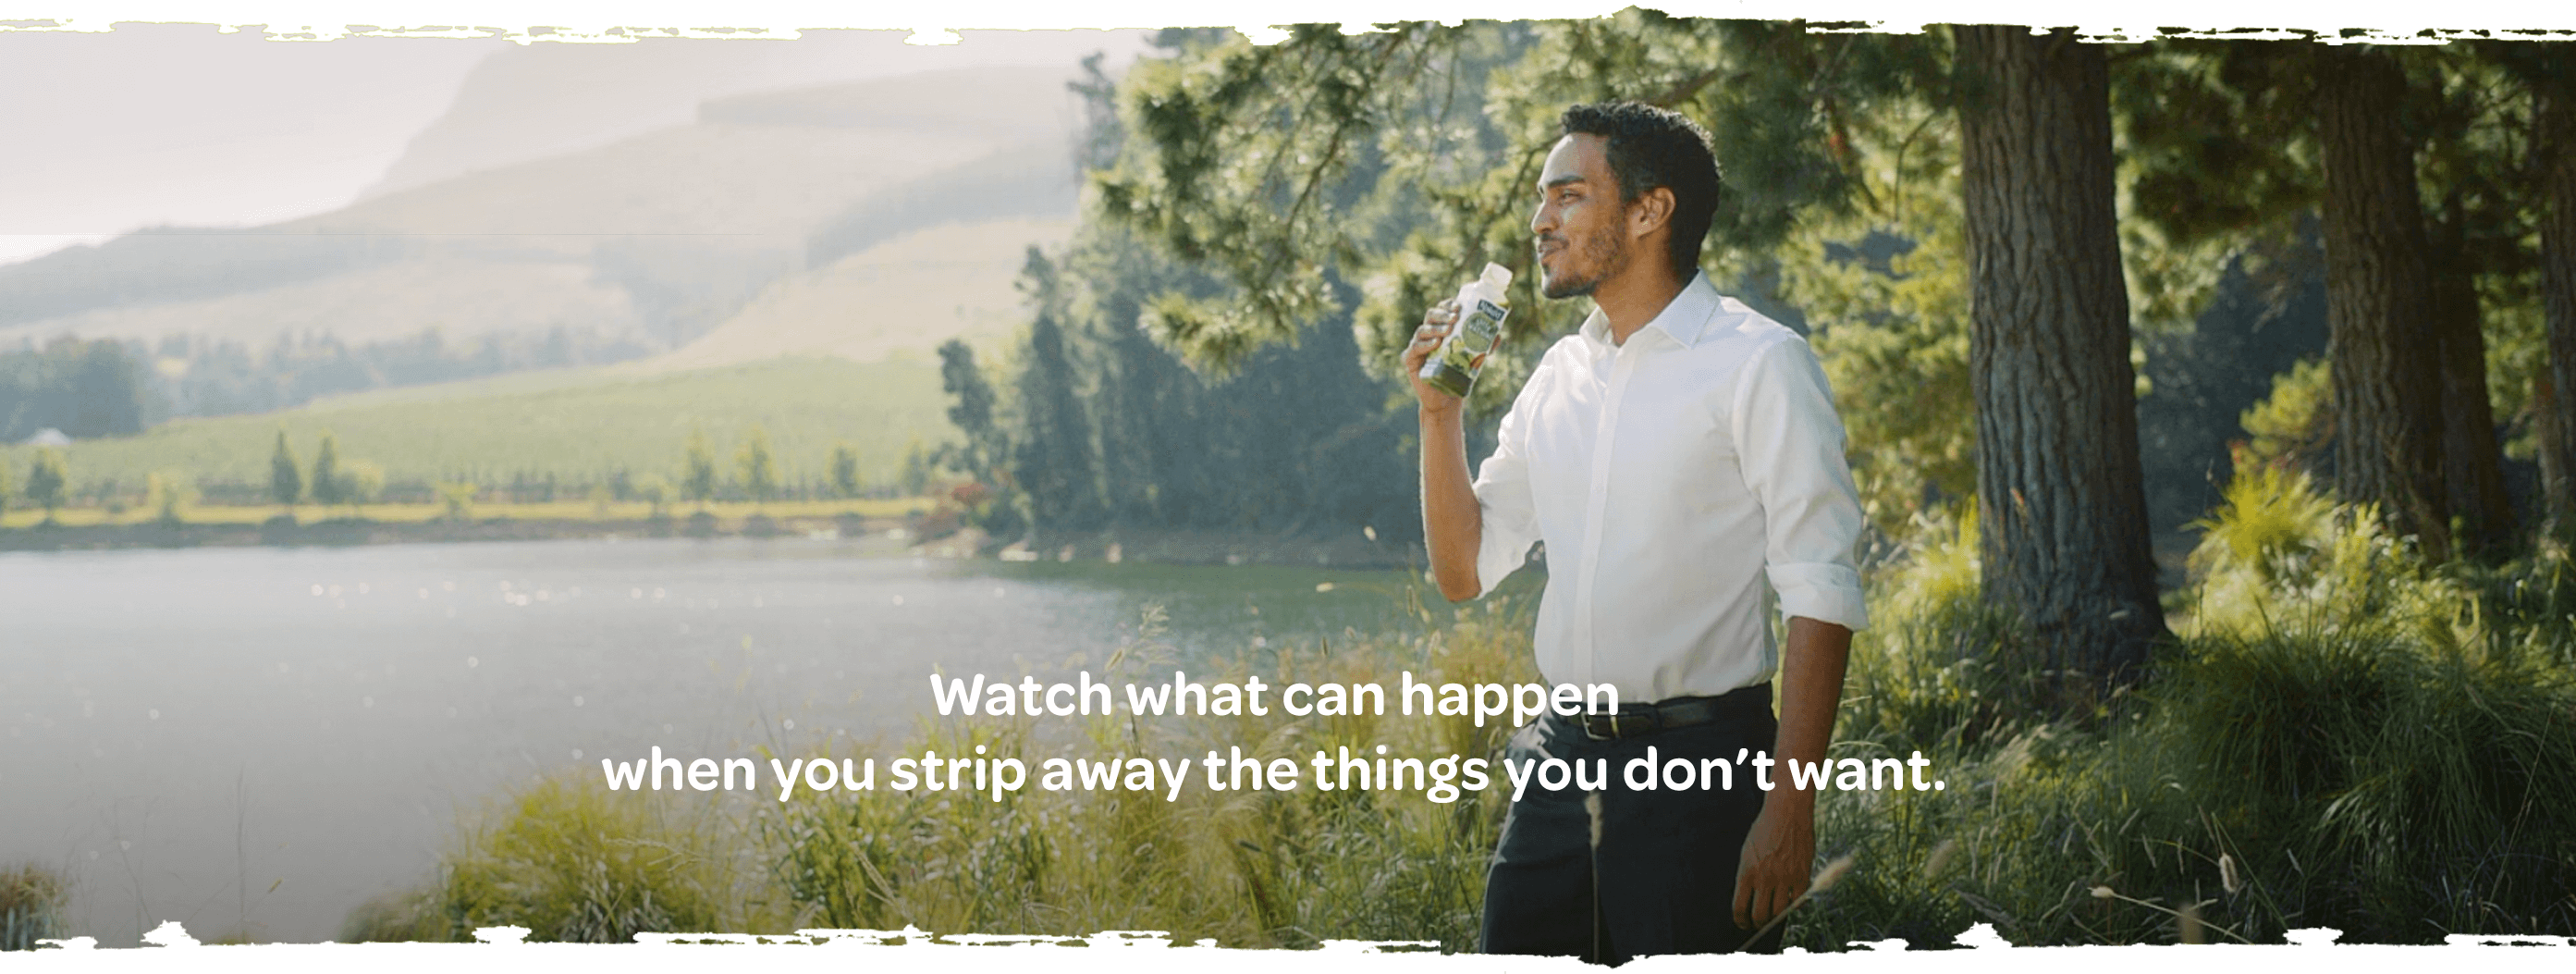 Watch what can happen when you strip away the things you don't want.